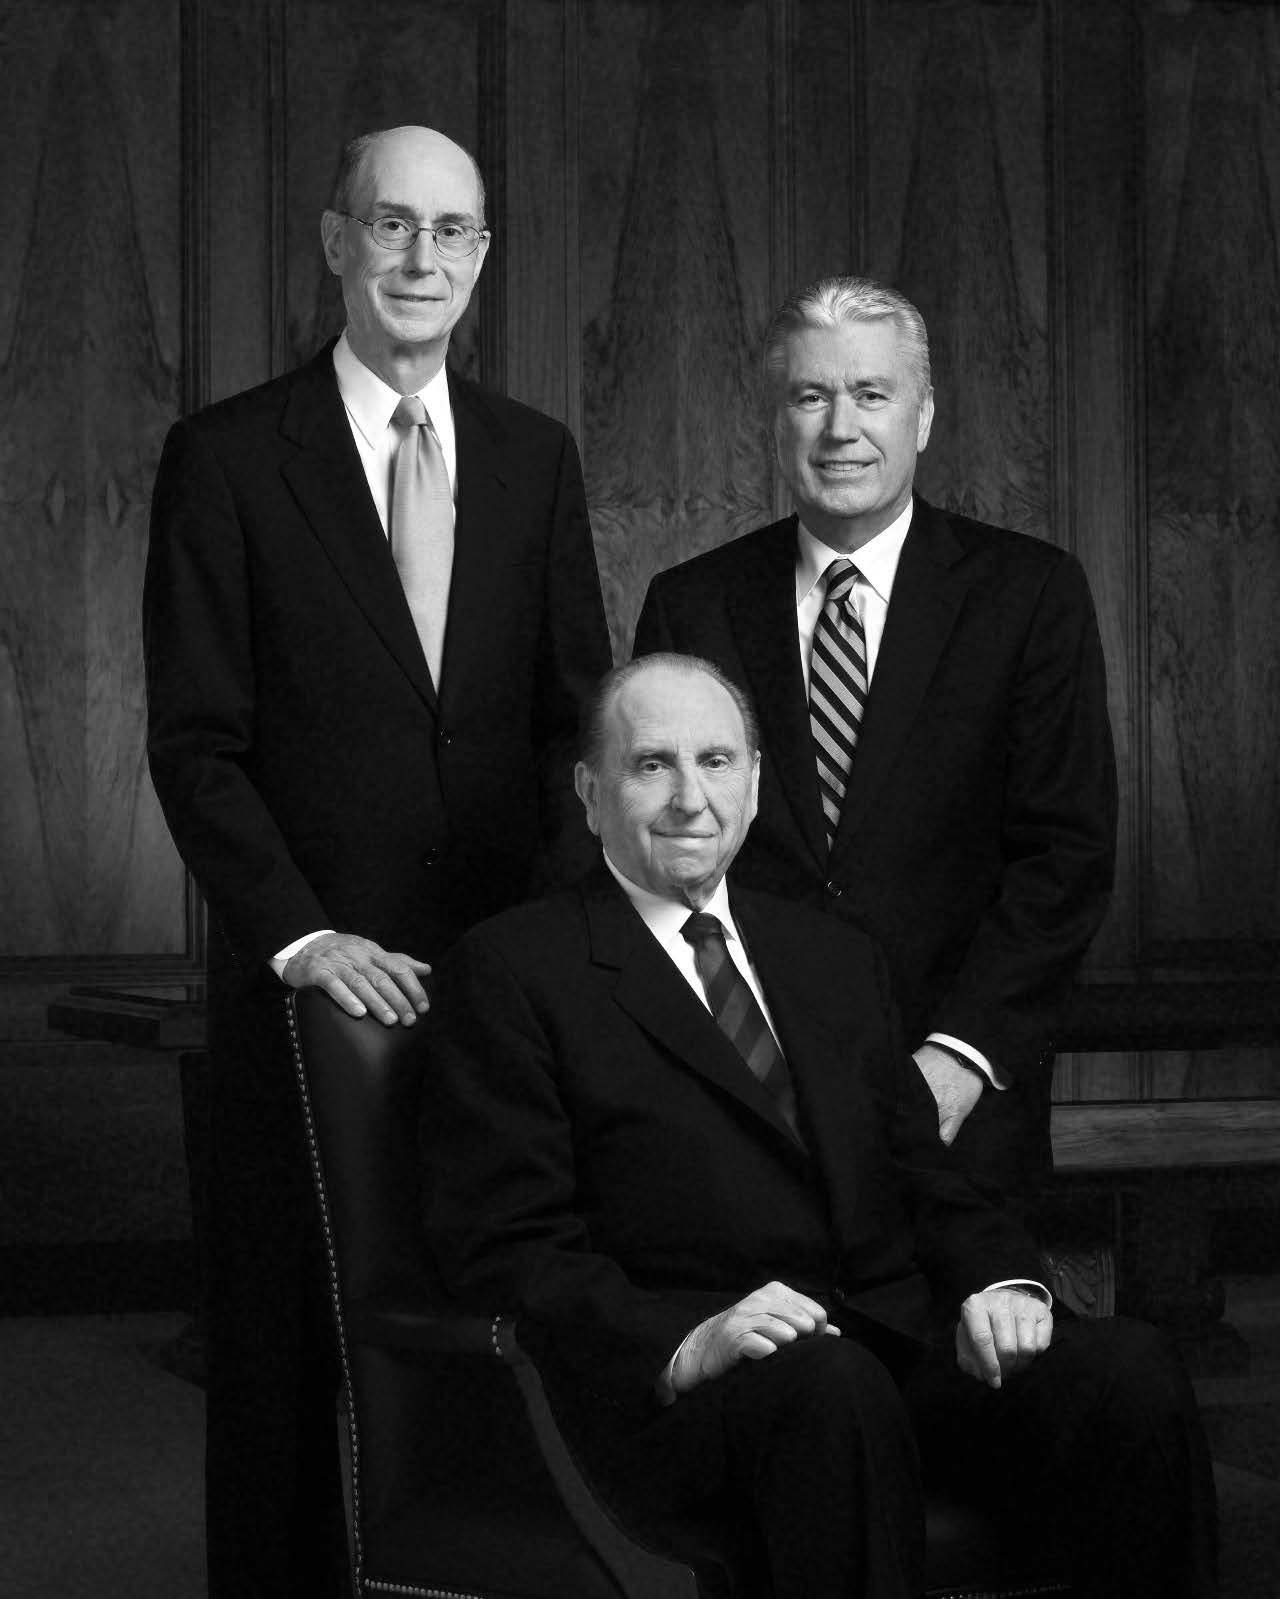 The First Presidency: Thomas S. Monson, Henry B. Eyring, and Dieter F. Uchtdorf, 2008. © Intellectual Reserve, Inc.